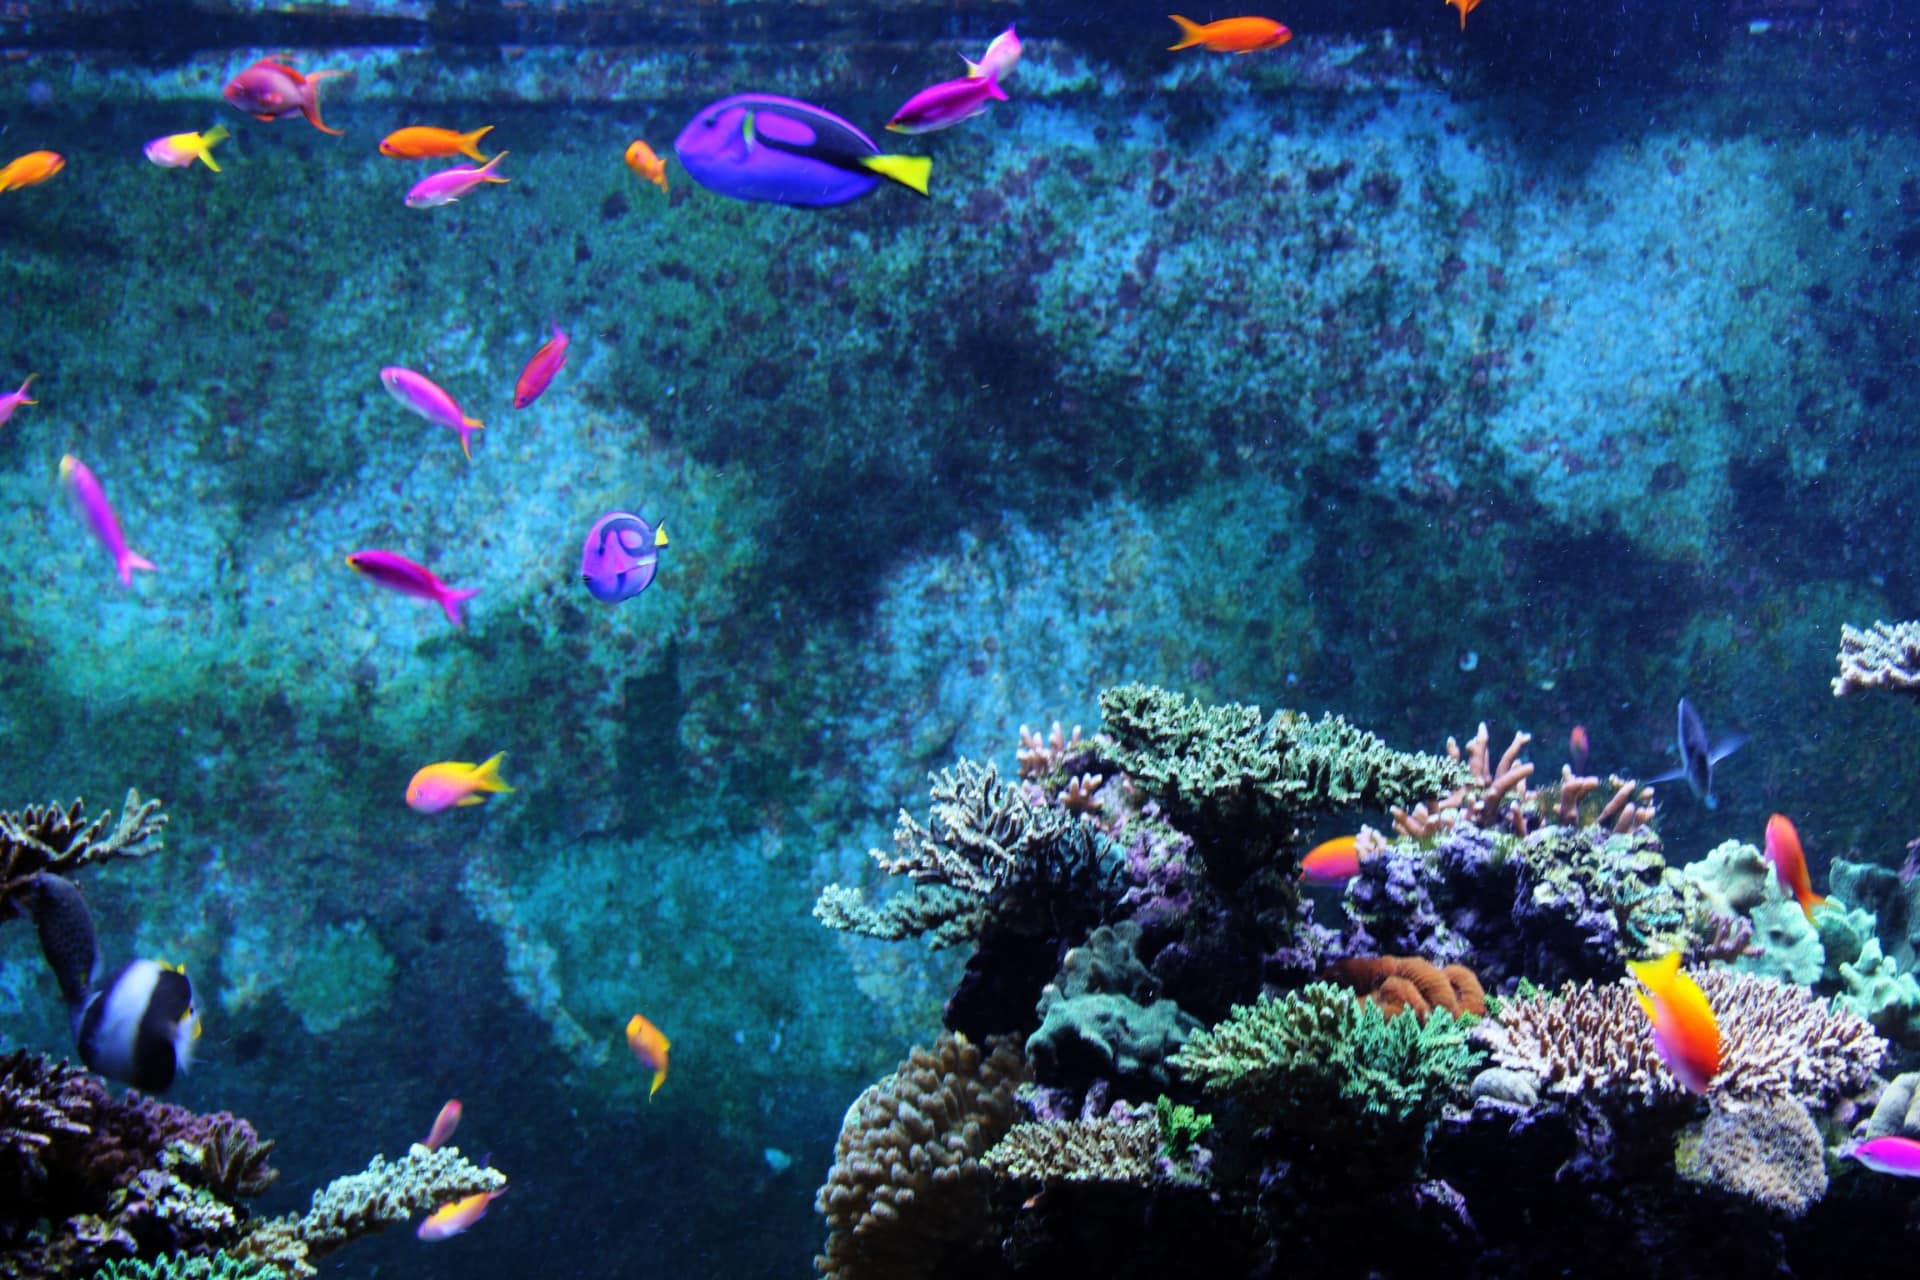 Your Aquarium can be beautiful like this!